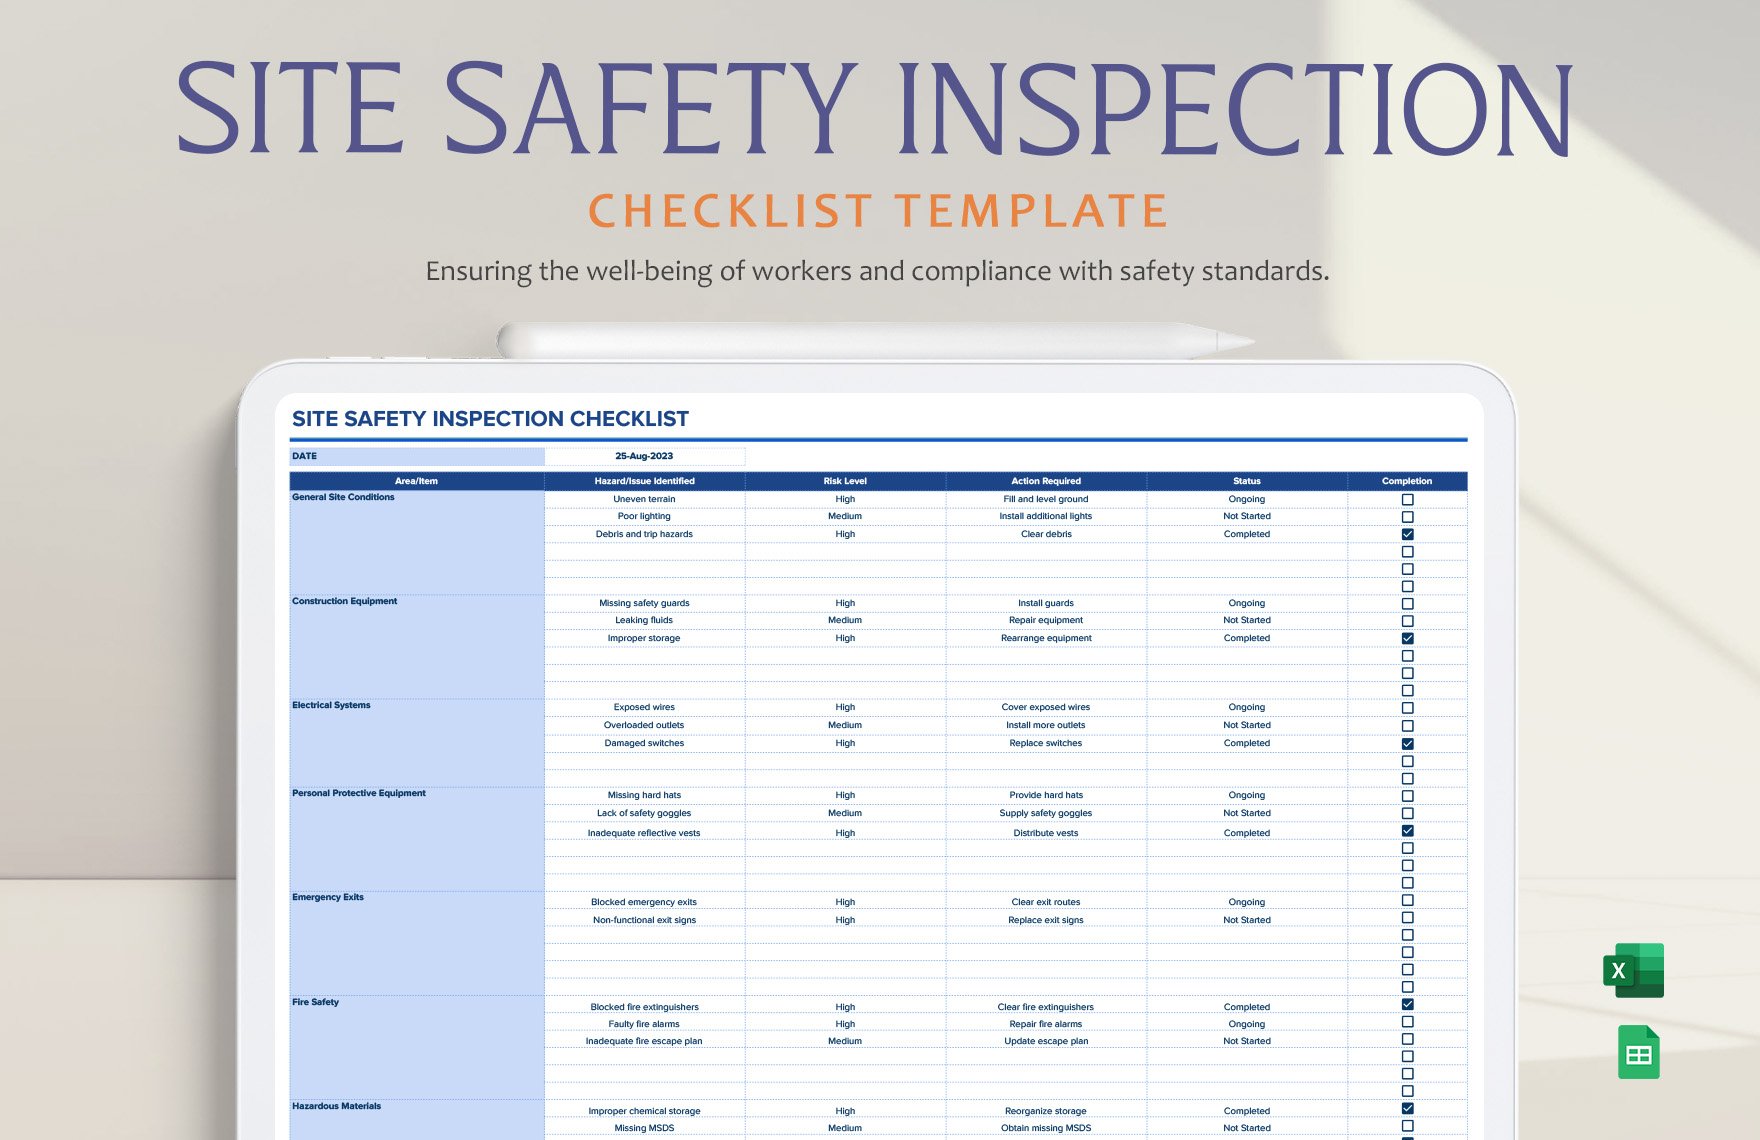 Site Safety Inspection Checklist Template in Excel, Google Sheets